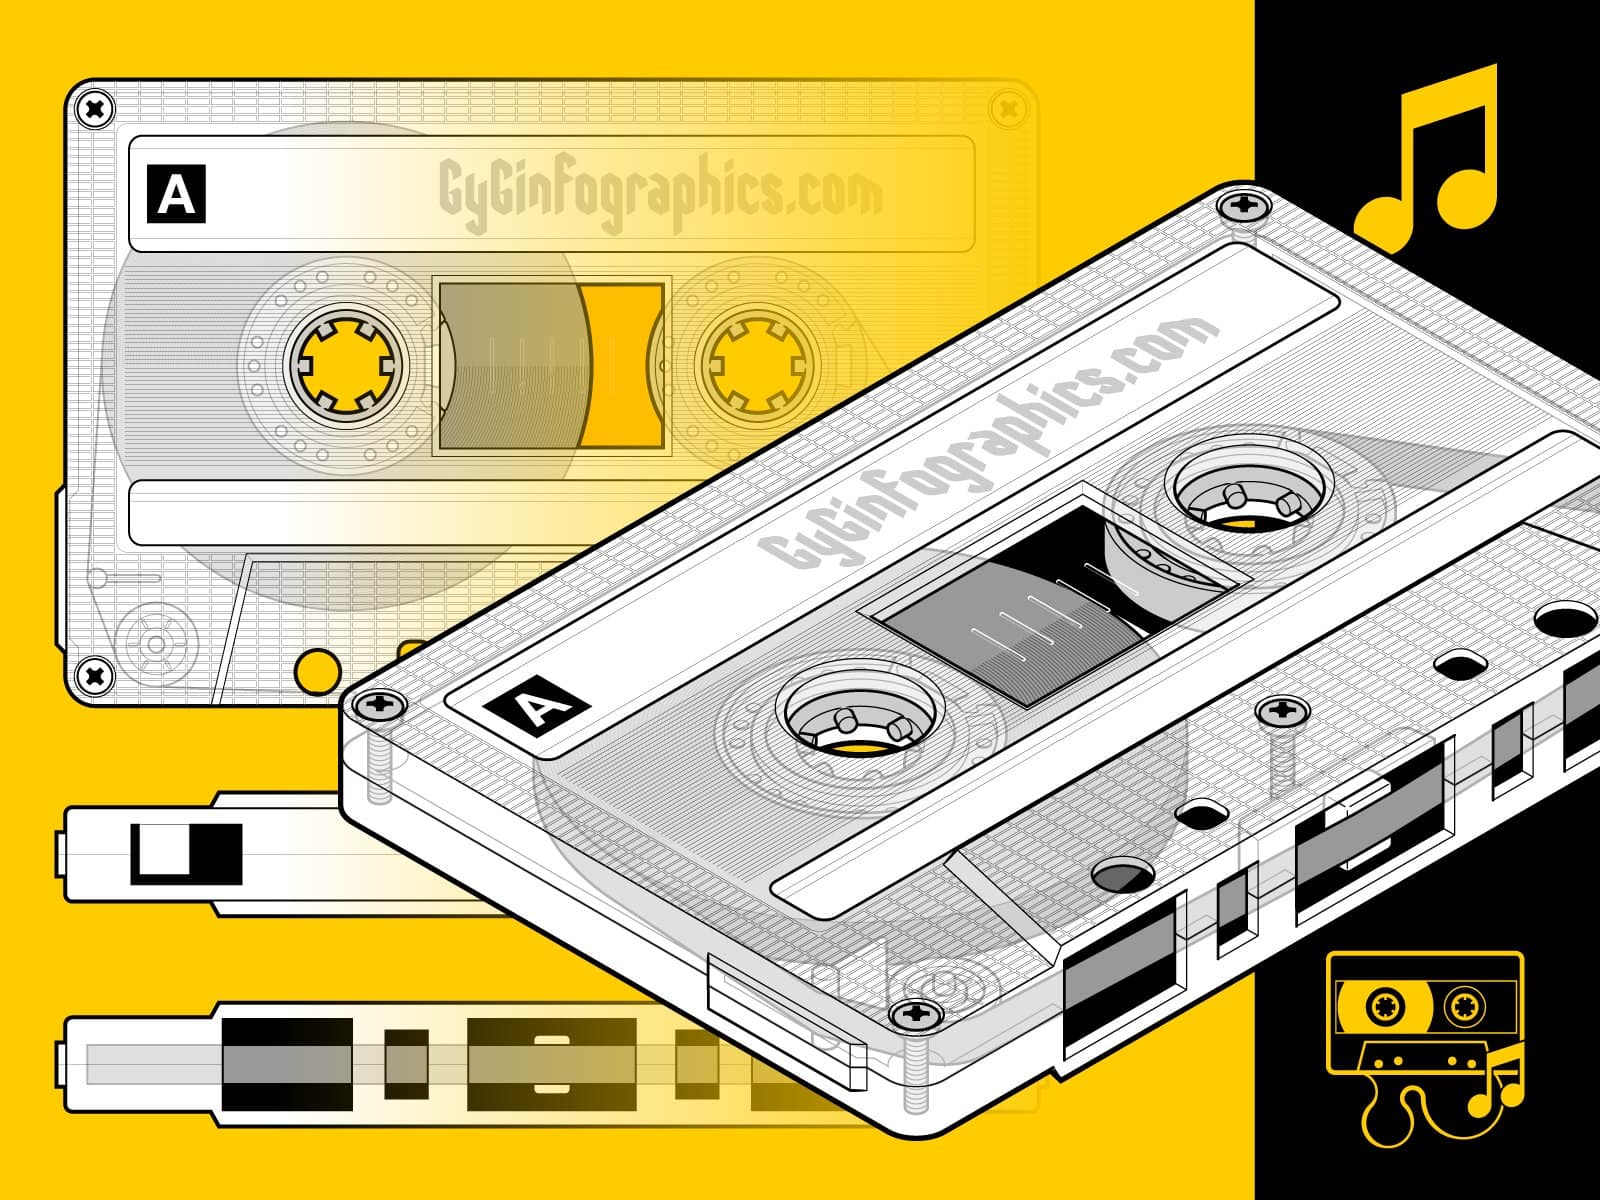 A music tape illustration in yellow which represents 90s nostalgia and style